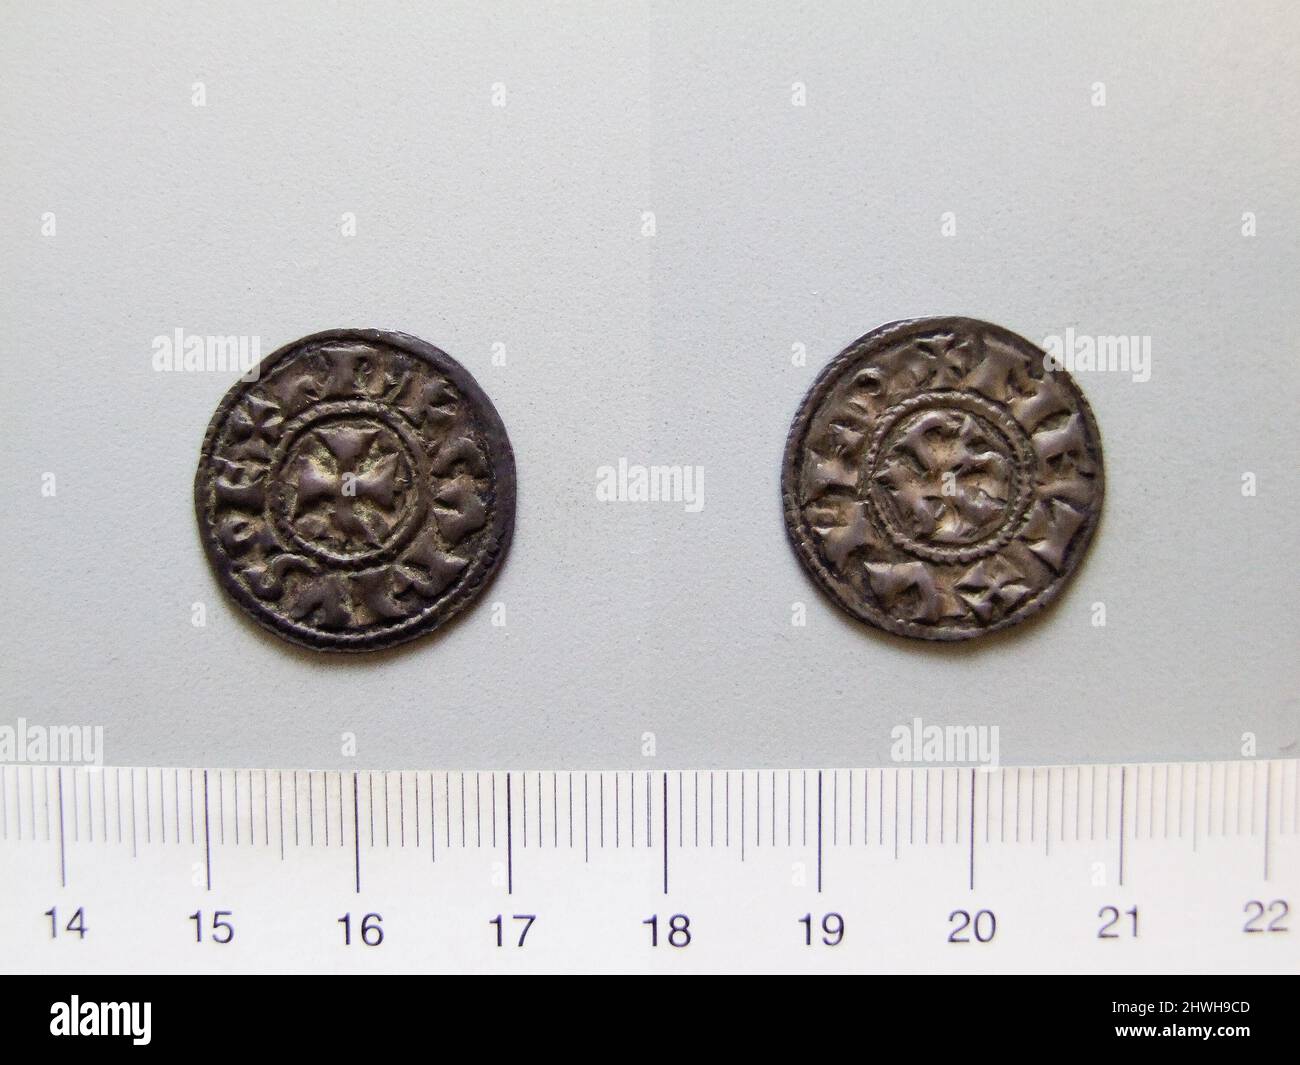 1 Denier of Charles II, King of France from Melle. Ruler: Charles II, King of France, French, 823–877, ruled 840–77 Mint: Melle Artist: Unknown Stock Photo